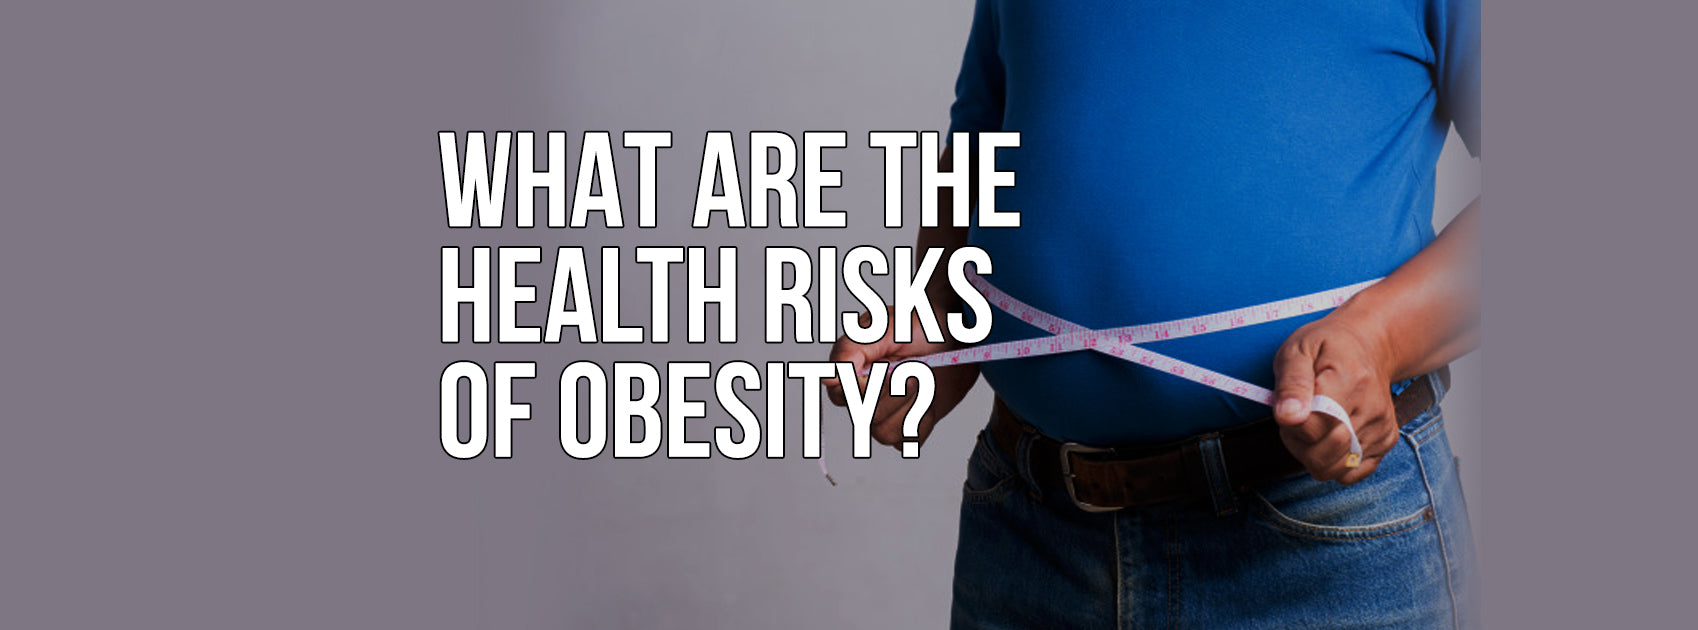 WHAT ARE THE HEALTH RISKS OF OBESITY?